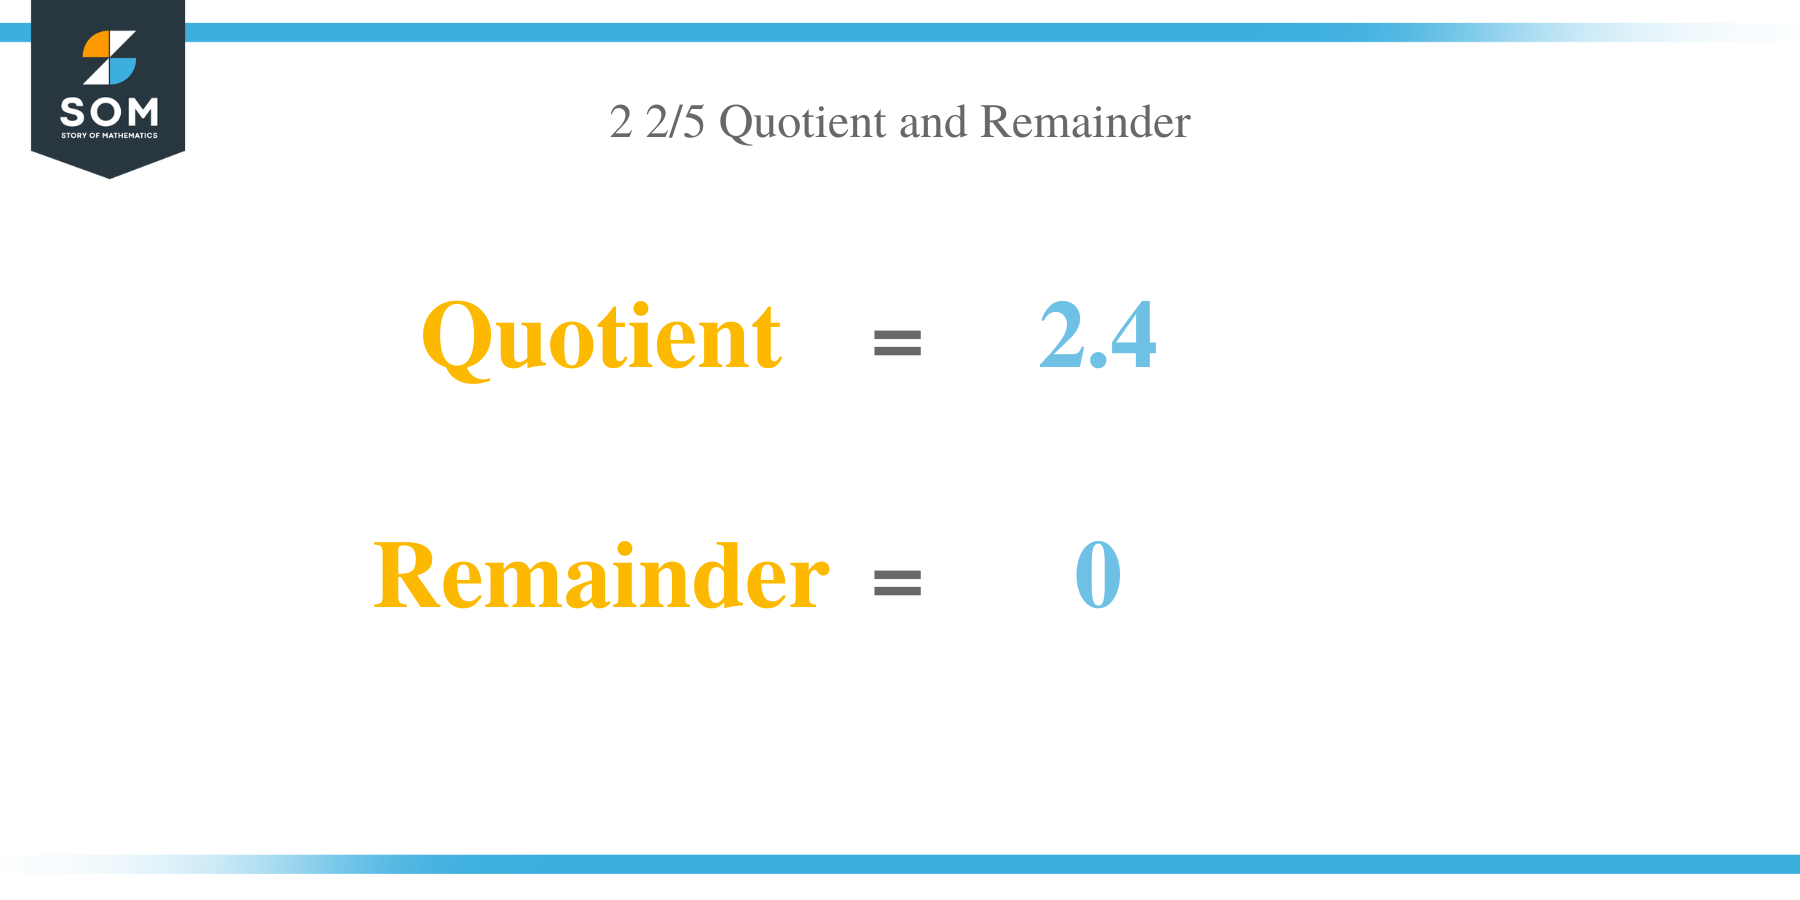 Quotient and Remainer of 2 2 per 5